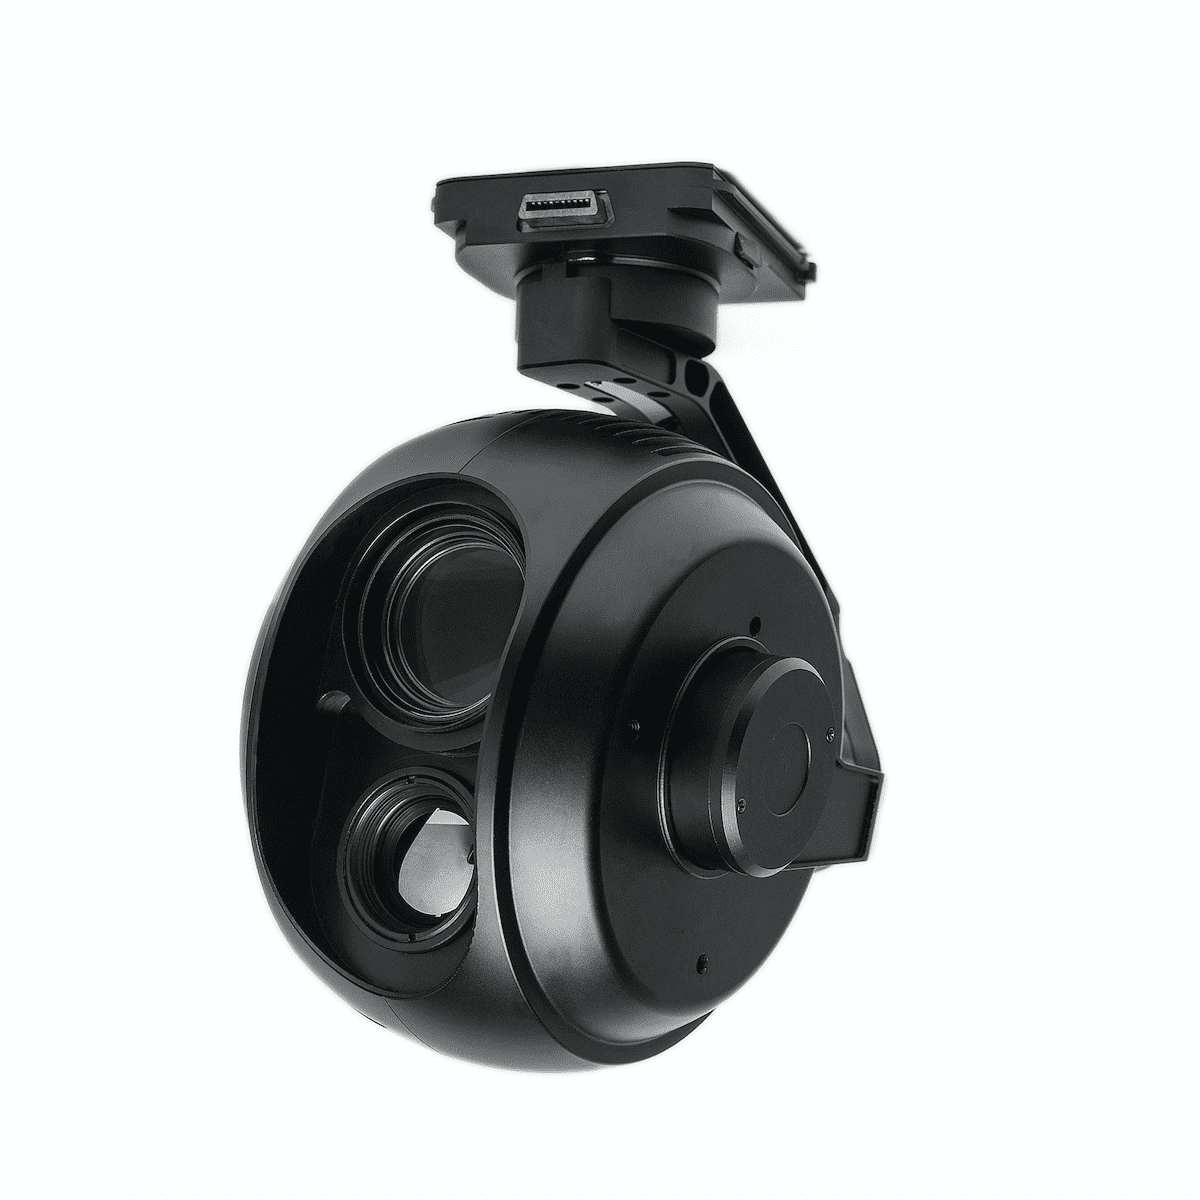 30X 2MP and 640 Thermal Dual Sensor 3-Axis Stabilization Drone Gimbal Camera Featured Image